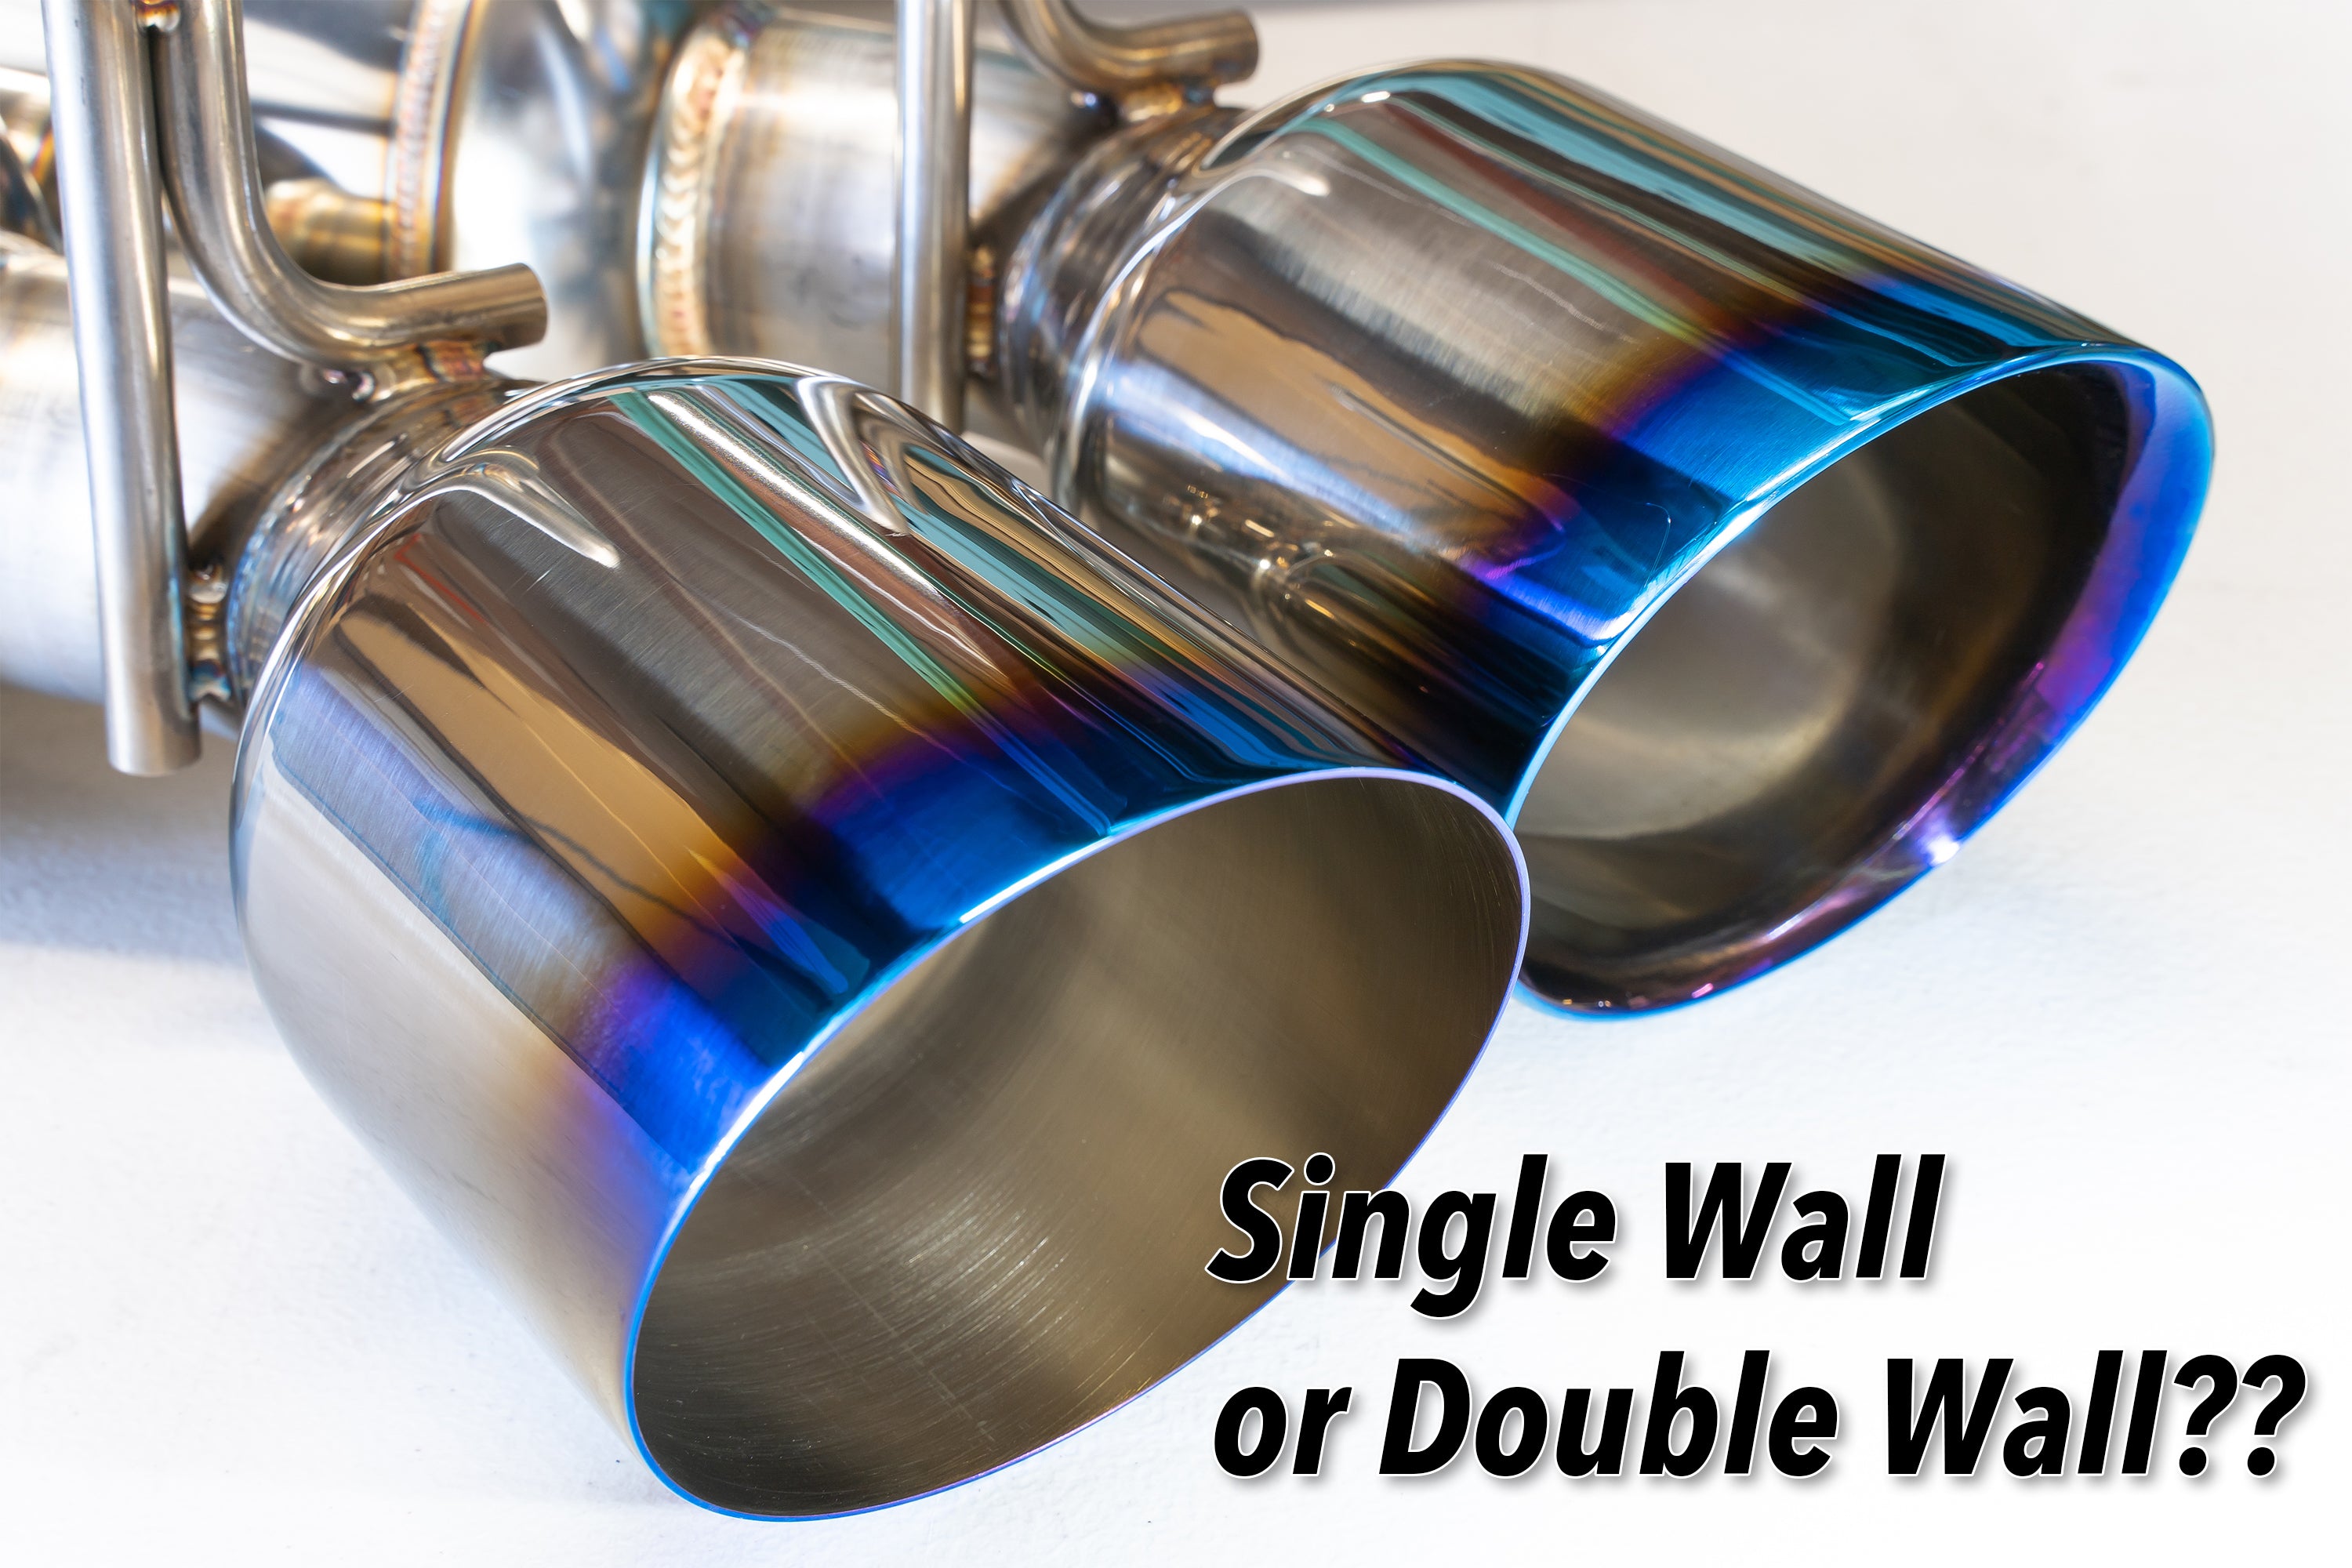 What's the difference between the Single Wall and Double Wall?